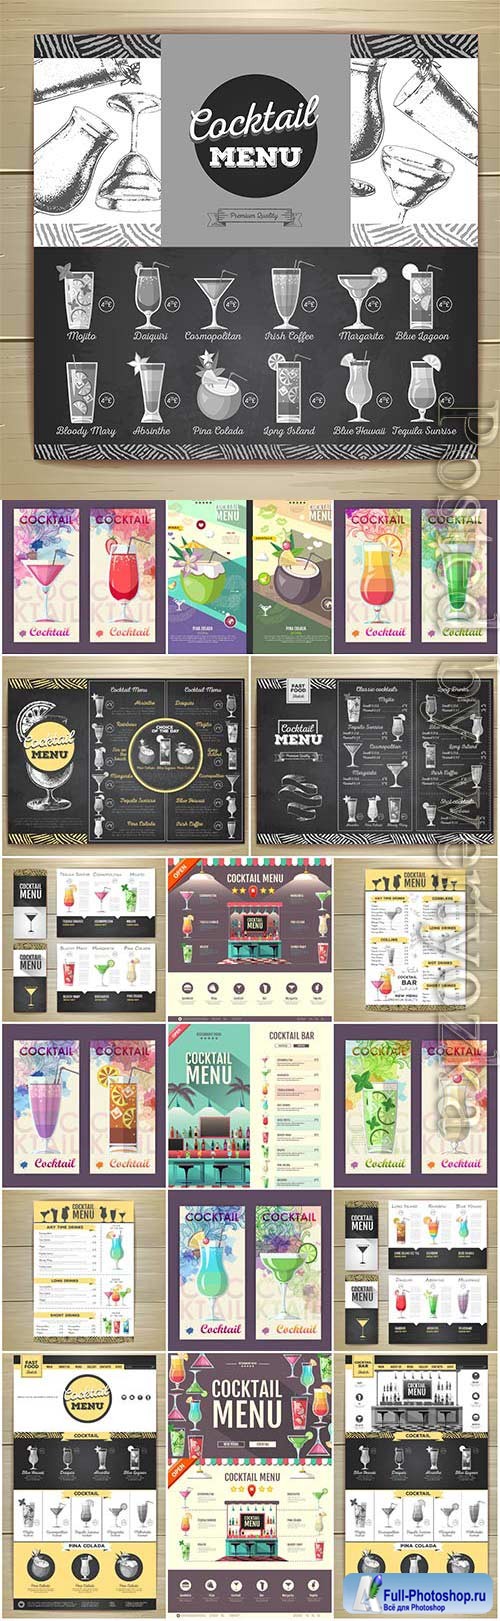 Cocktails menu for the bar in vector